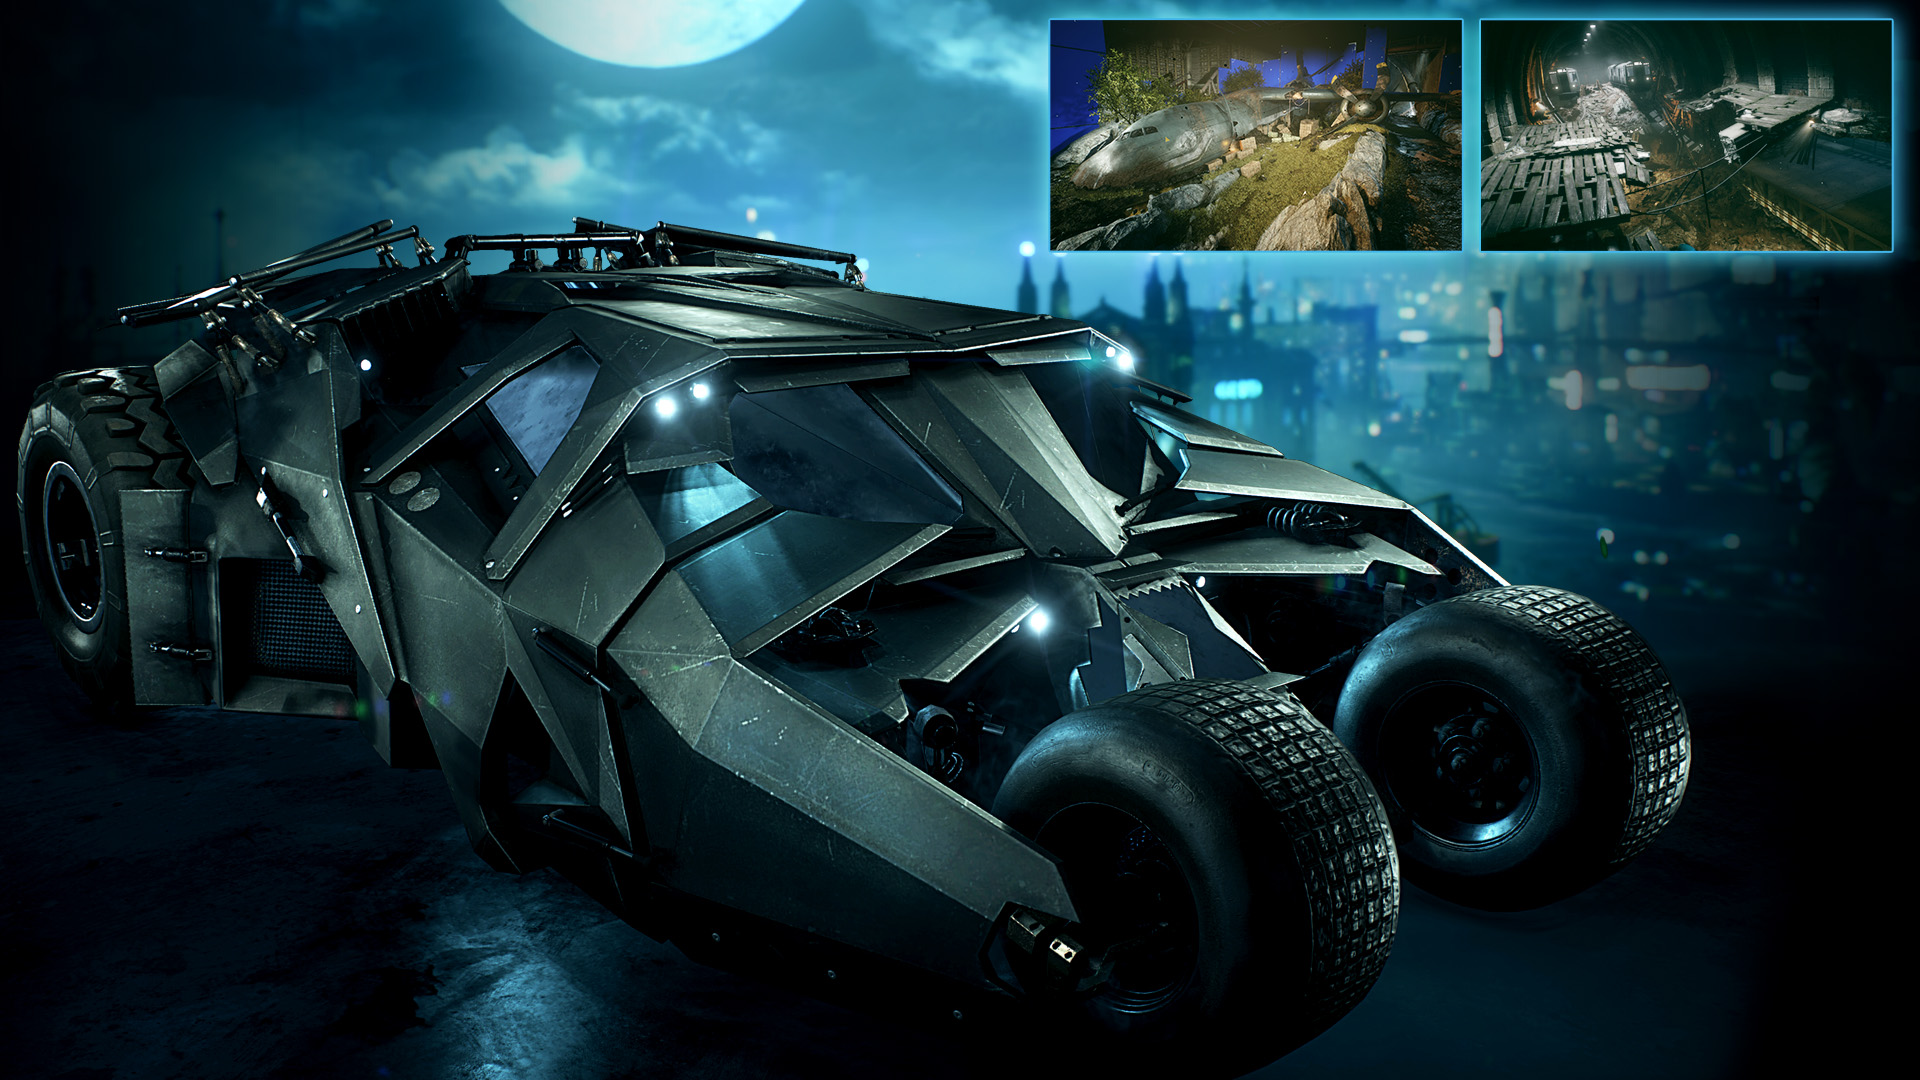 Latest Batman Arkham Knight DLC's available to download. Check out the  shots! | TheXboxHub